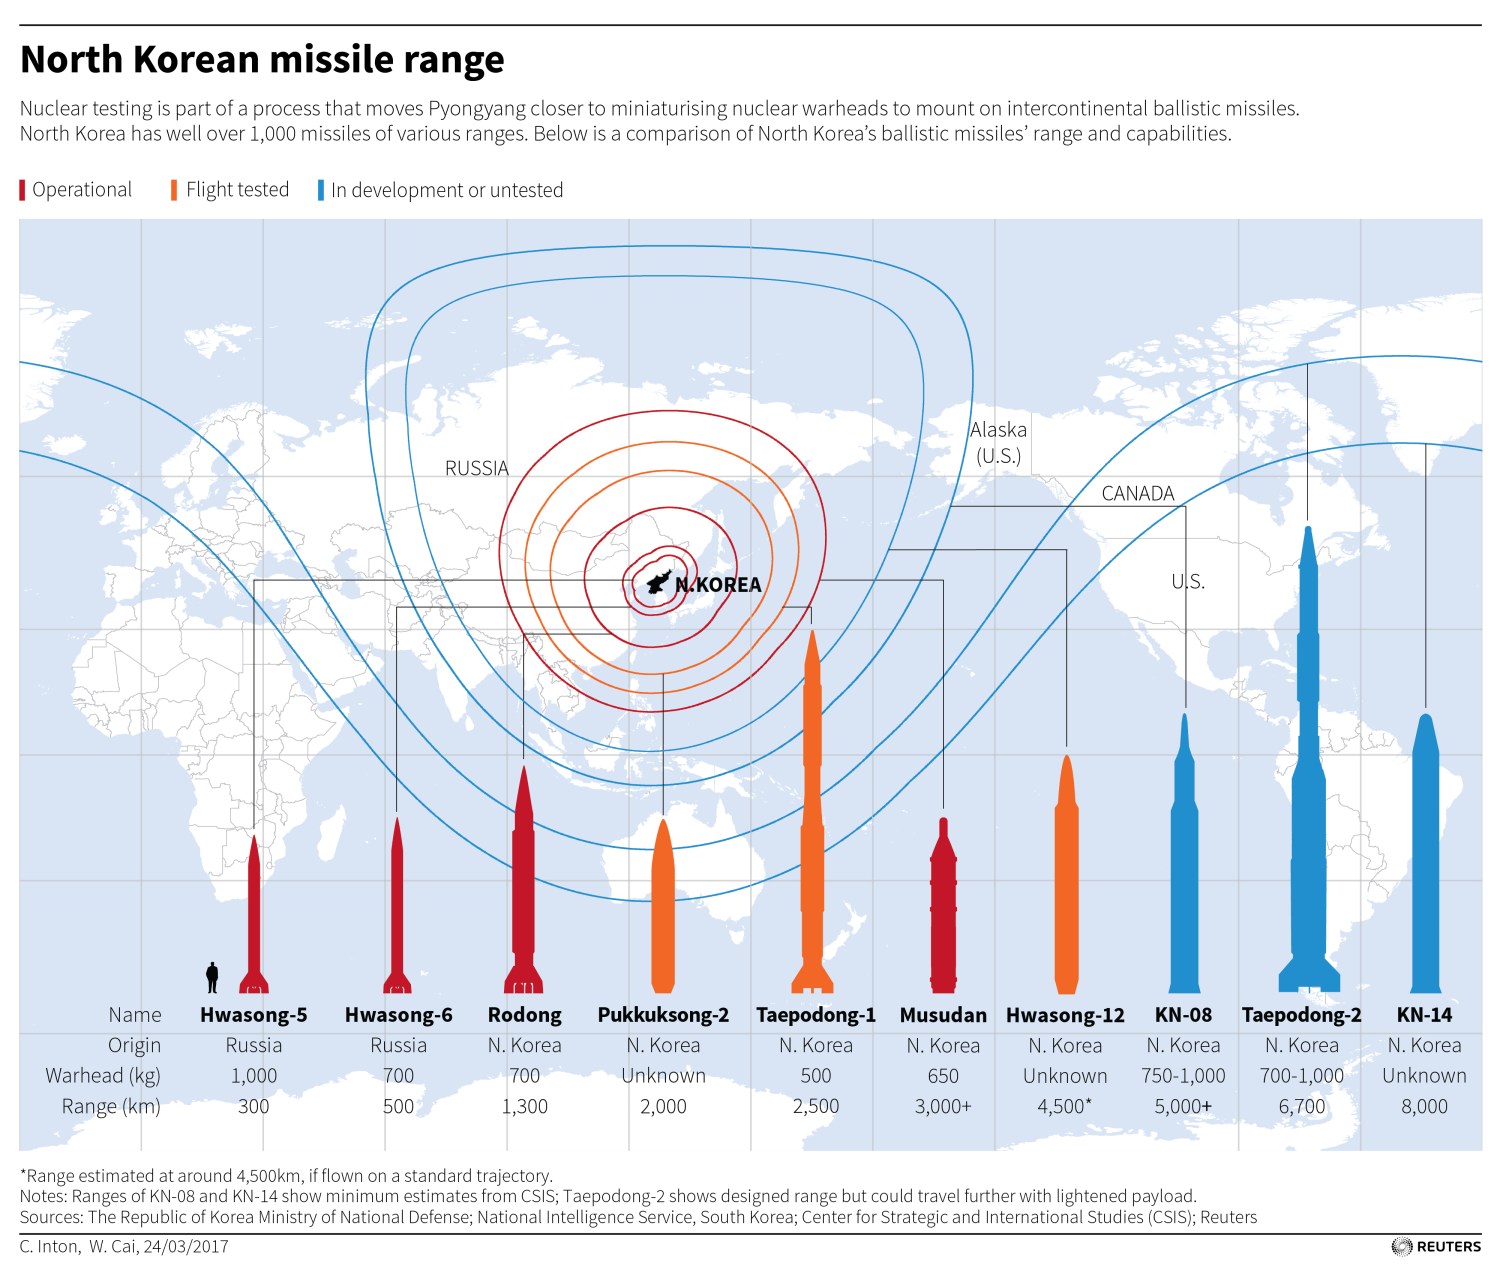 Map showing North Korean missiles and the distances they can reach.